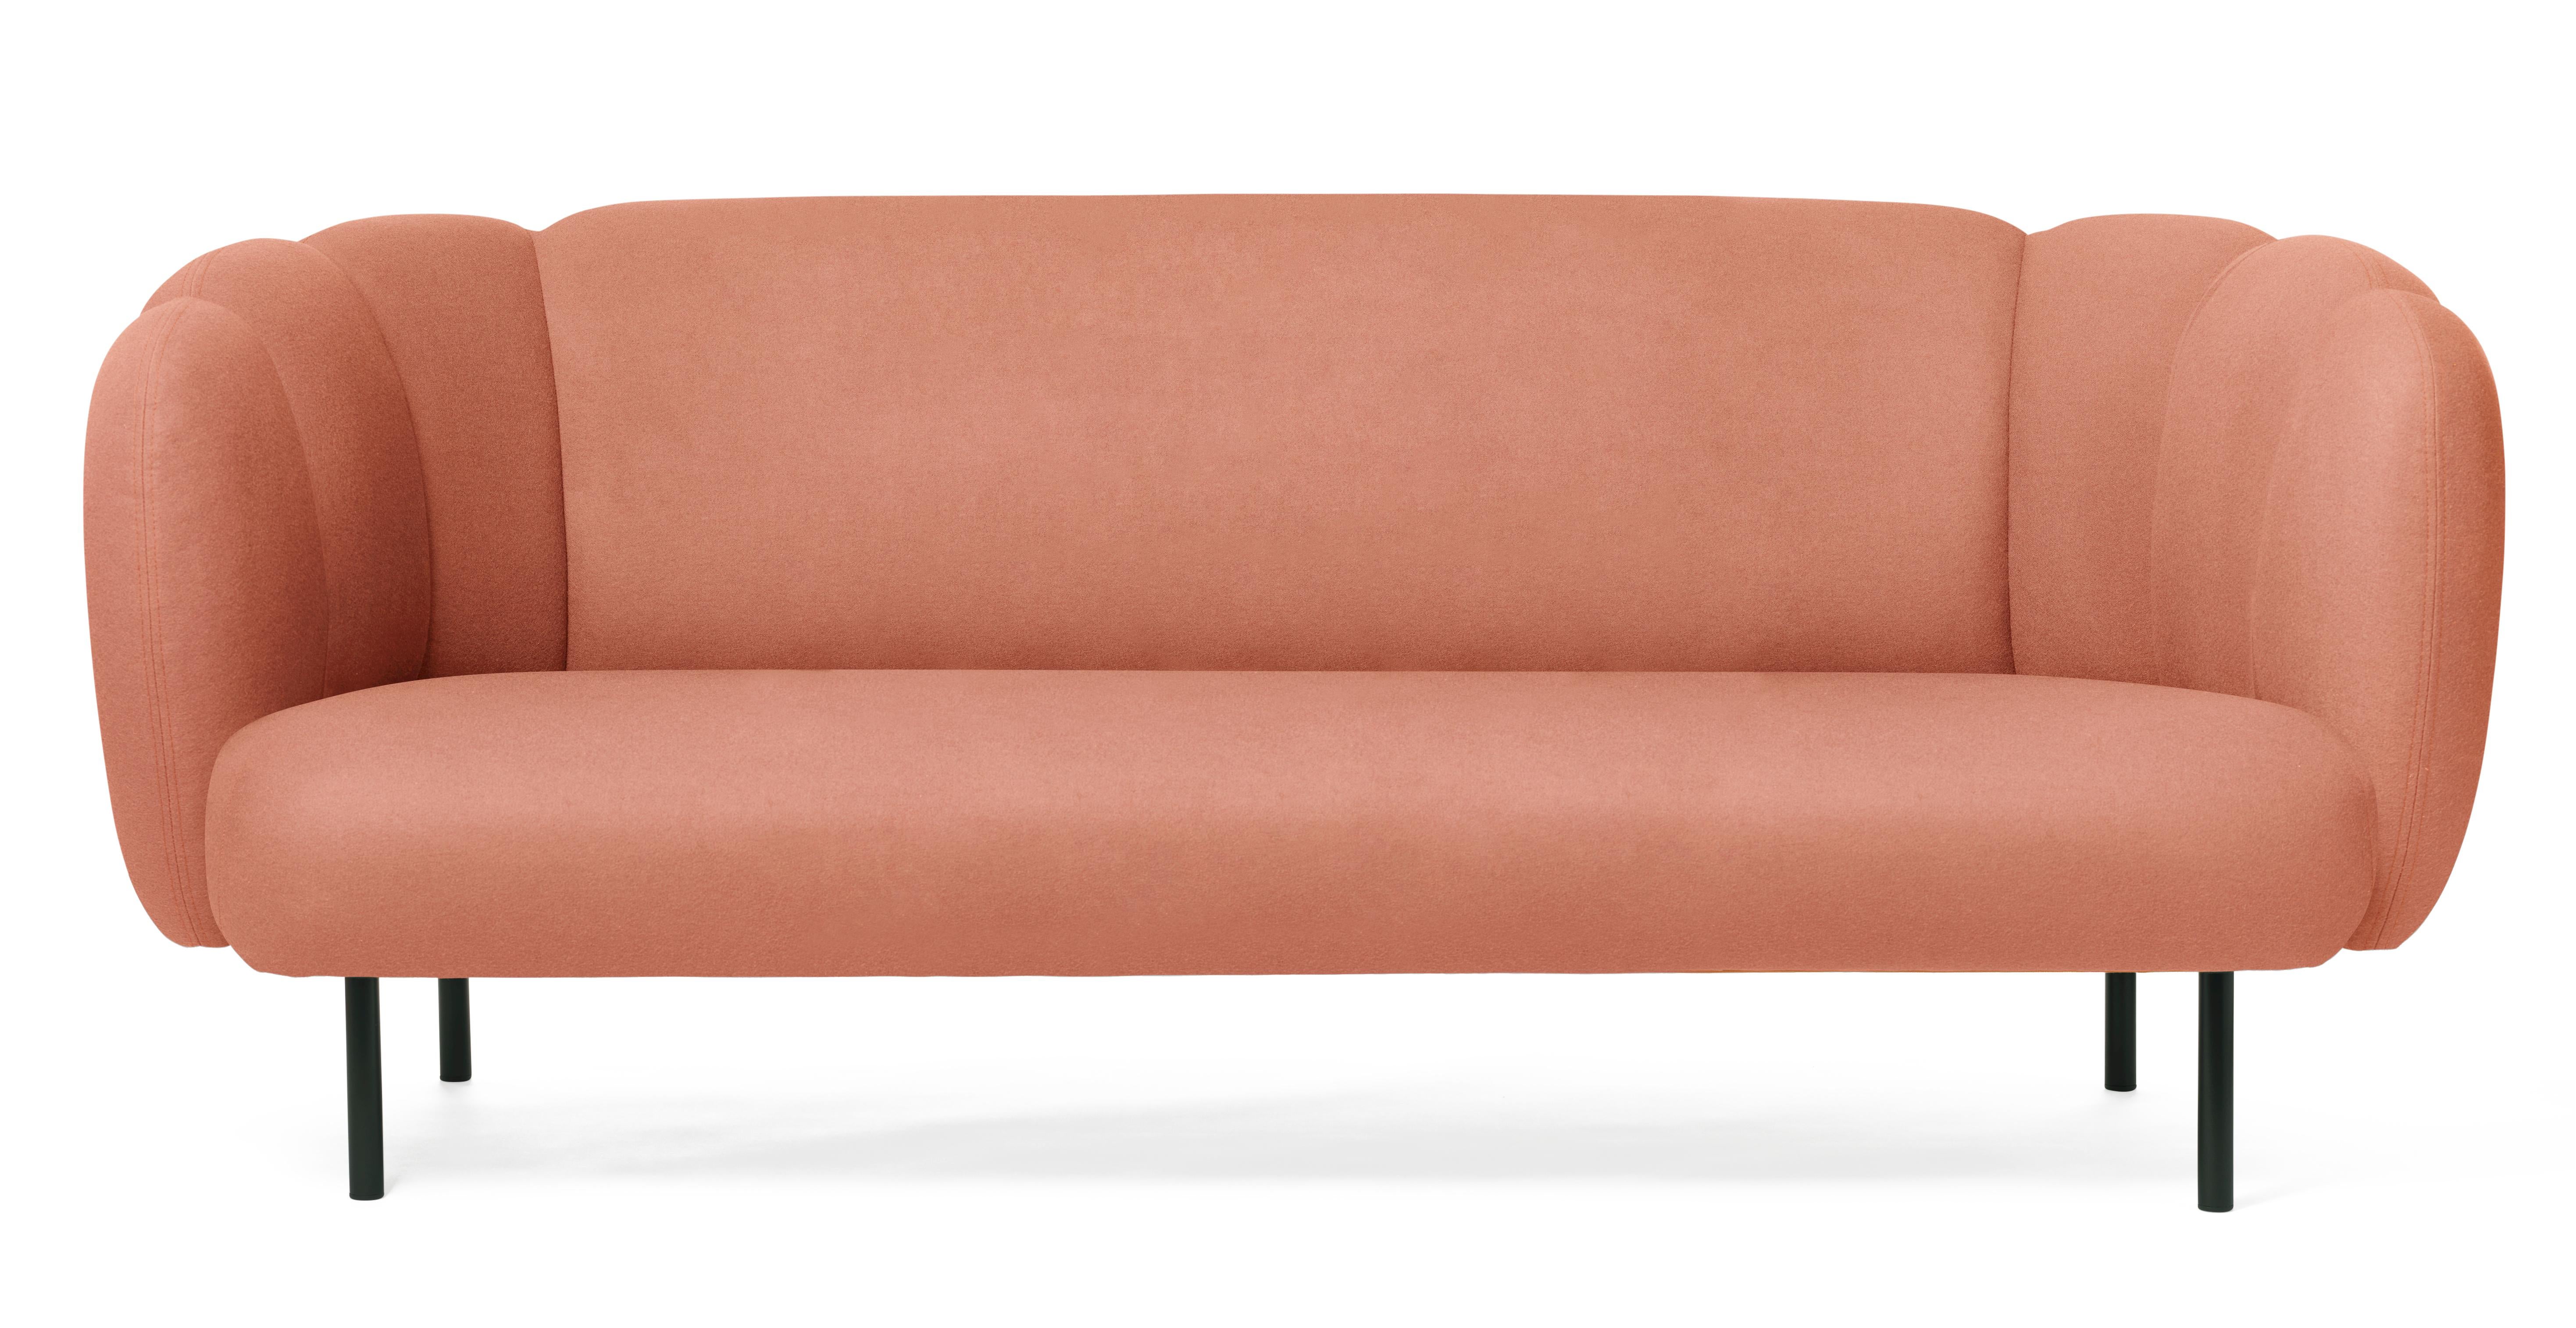 For Sale: Pink (Hero 511) Cape 3-Seat Stitch Sofa, by Charlotte Høncke from Warm Nordic